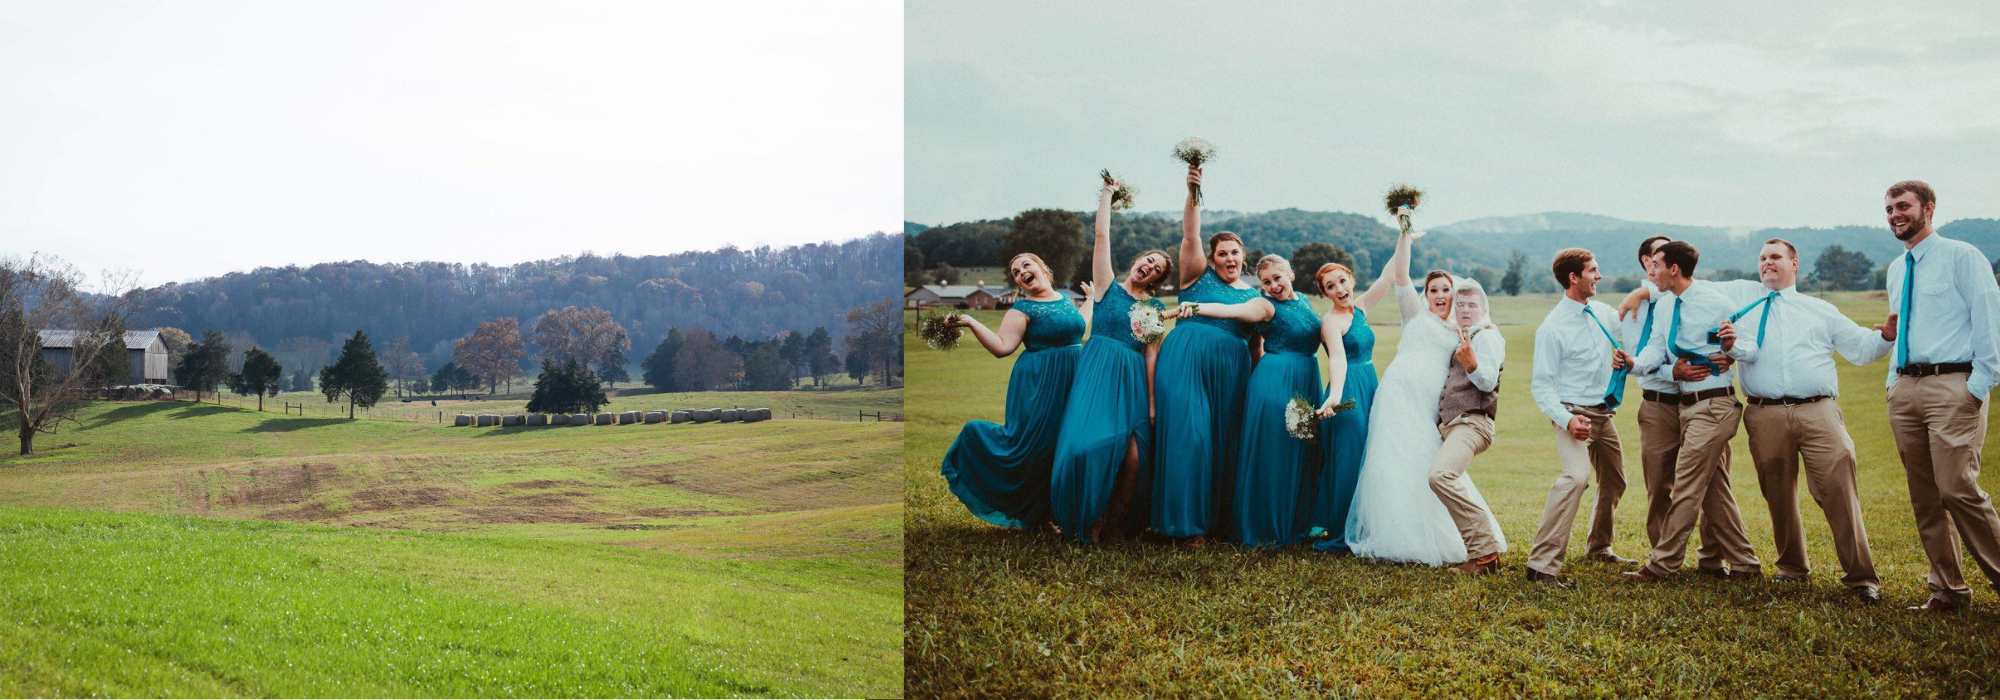 open pasture and a bridal party doing a funny pose 